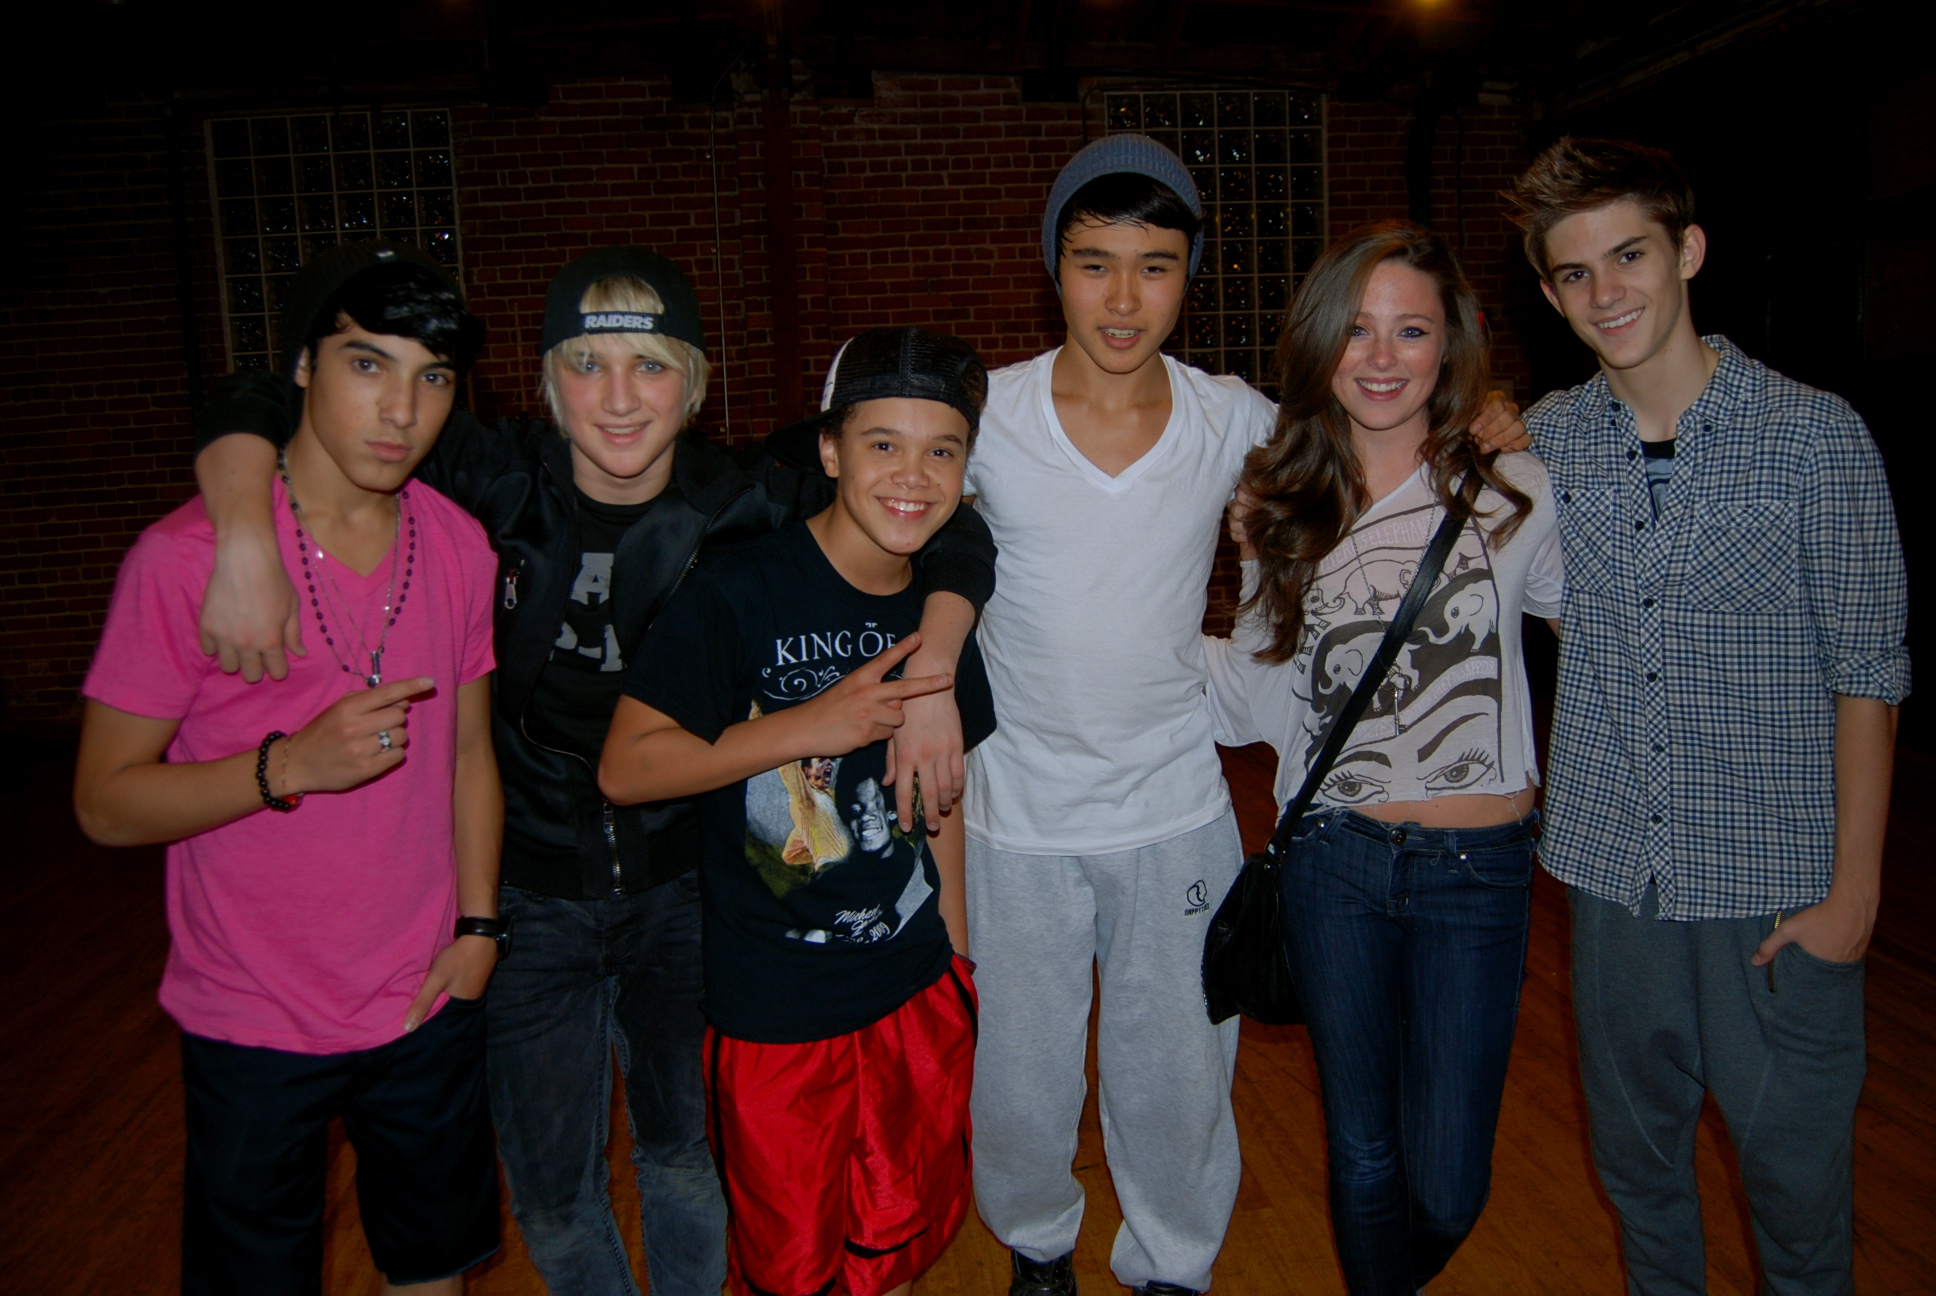 Sarah McMullen with boy band IM5